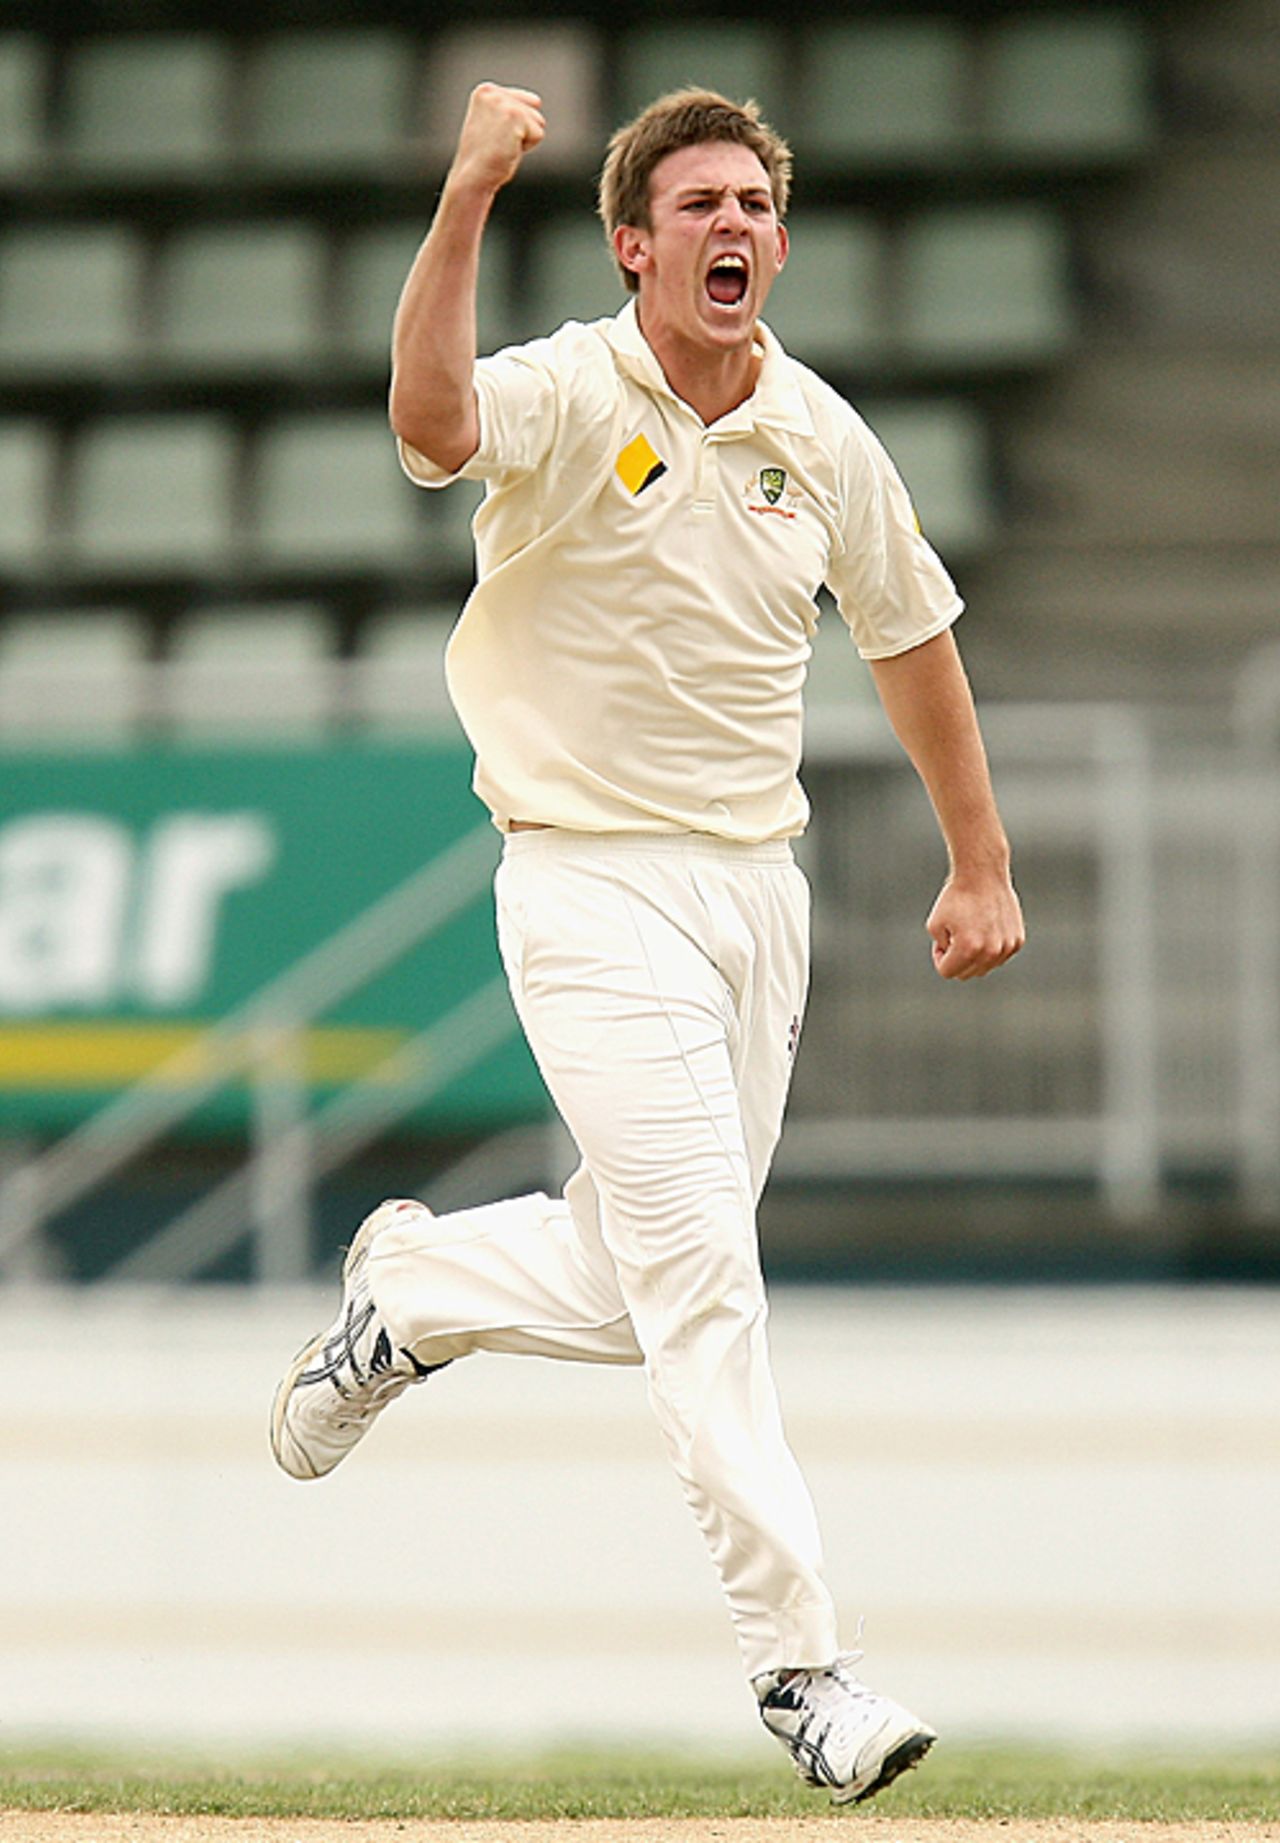 Mitchell Marsh celebrates one of his three wickets, Australia Under-19 v India Under-19, 1st Test, Hobart, 2nd day, April 12, 2009